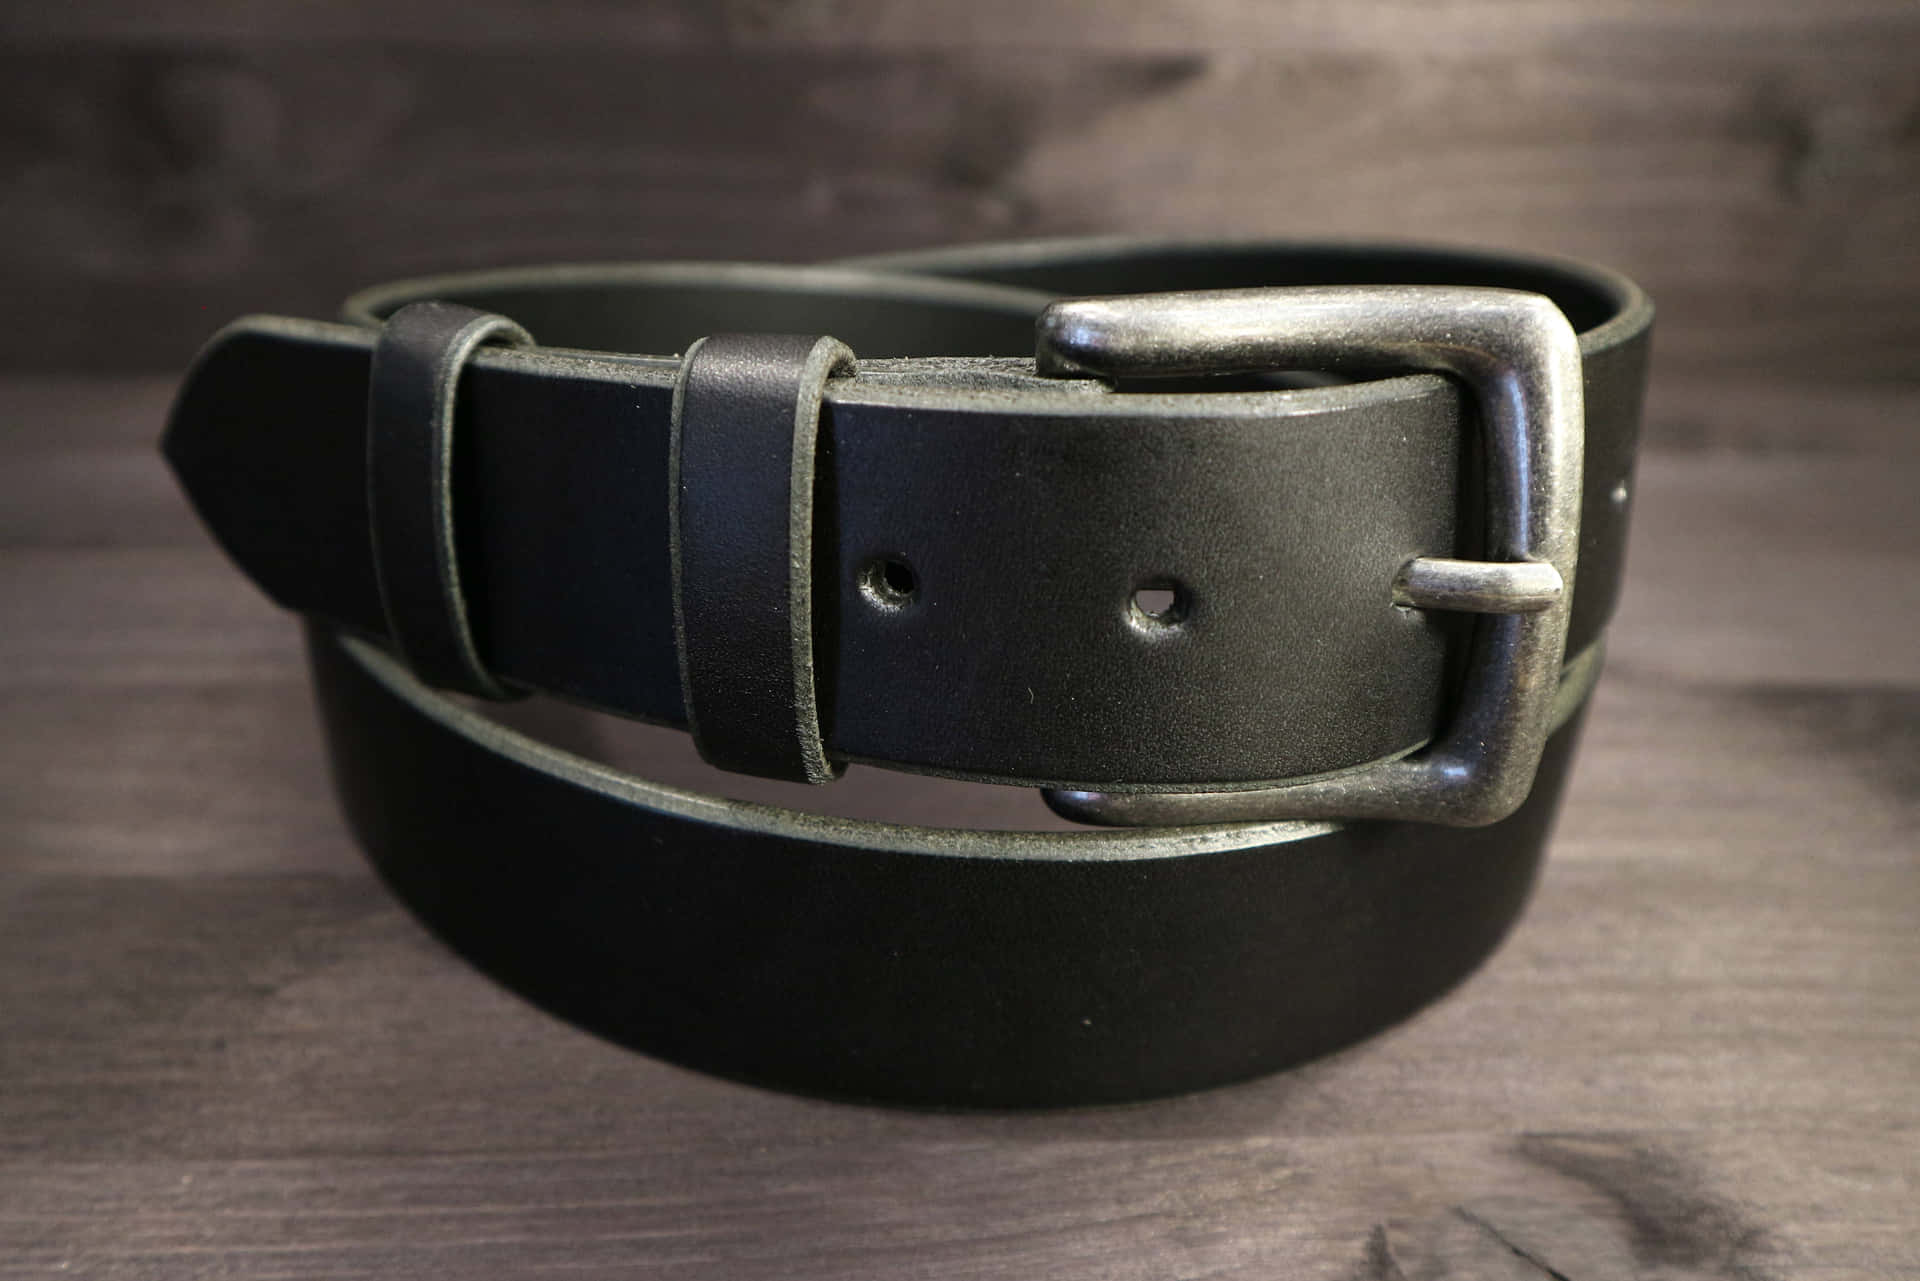 Download A Black Leather Belt With A Silver Buckle | Wallpapers.com